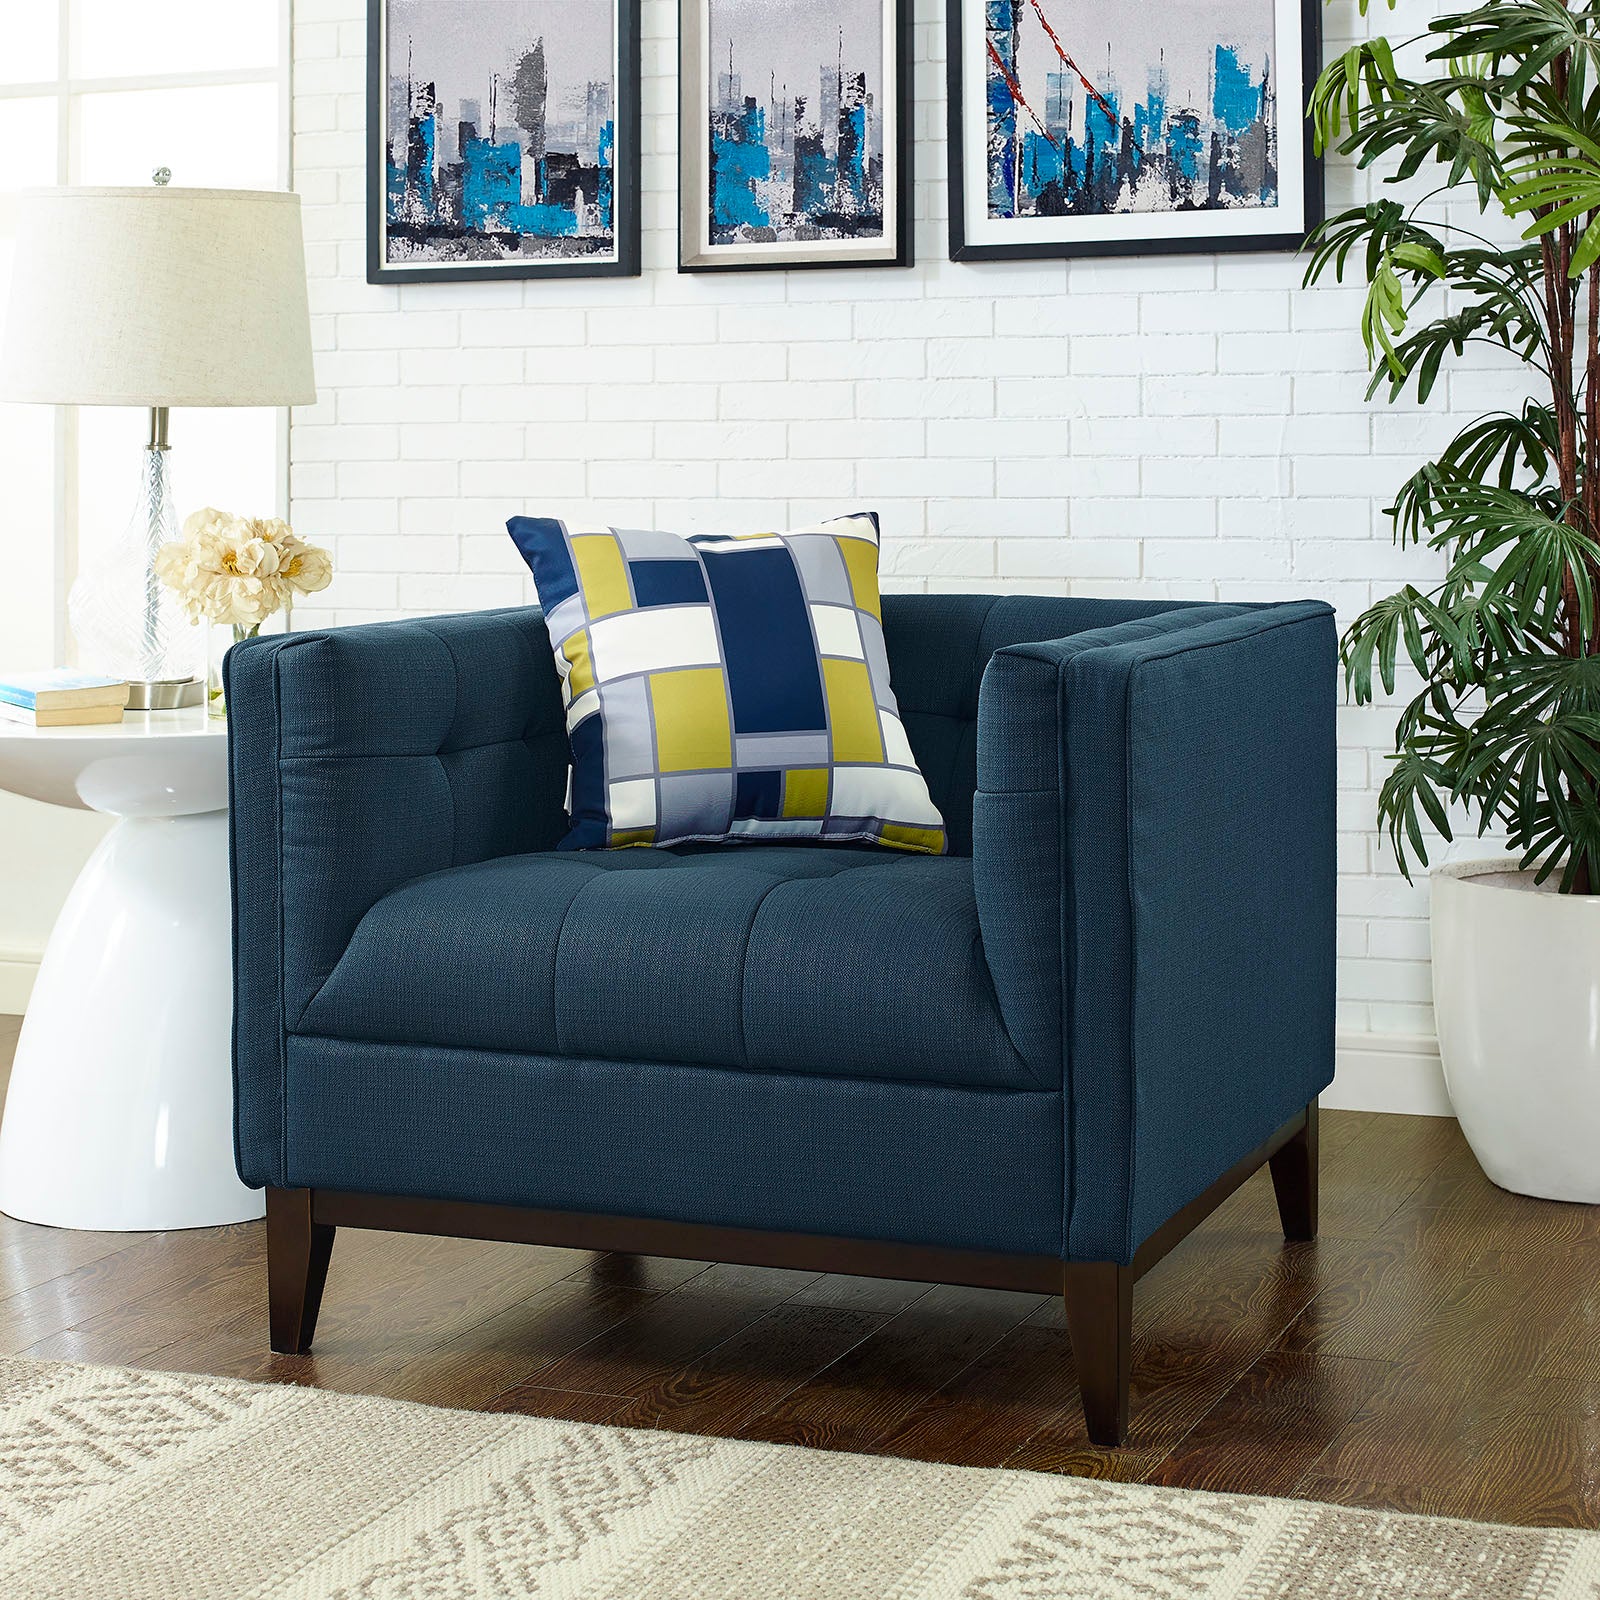 Serve Upholstered Fabric Armchair - East Shore Modern Home Furnishings